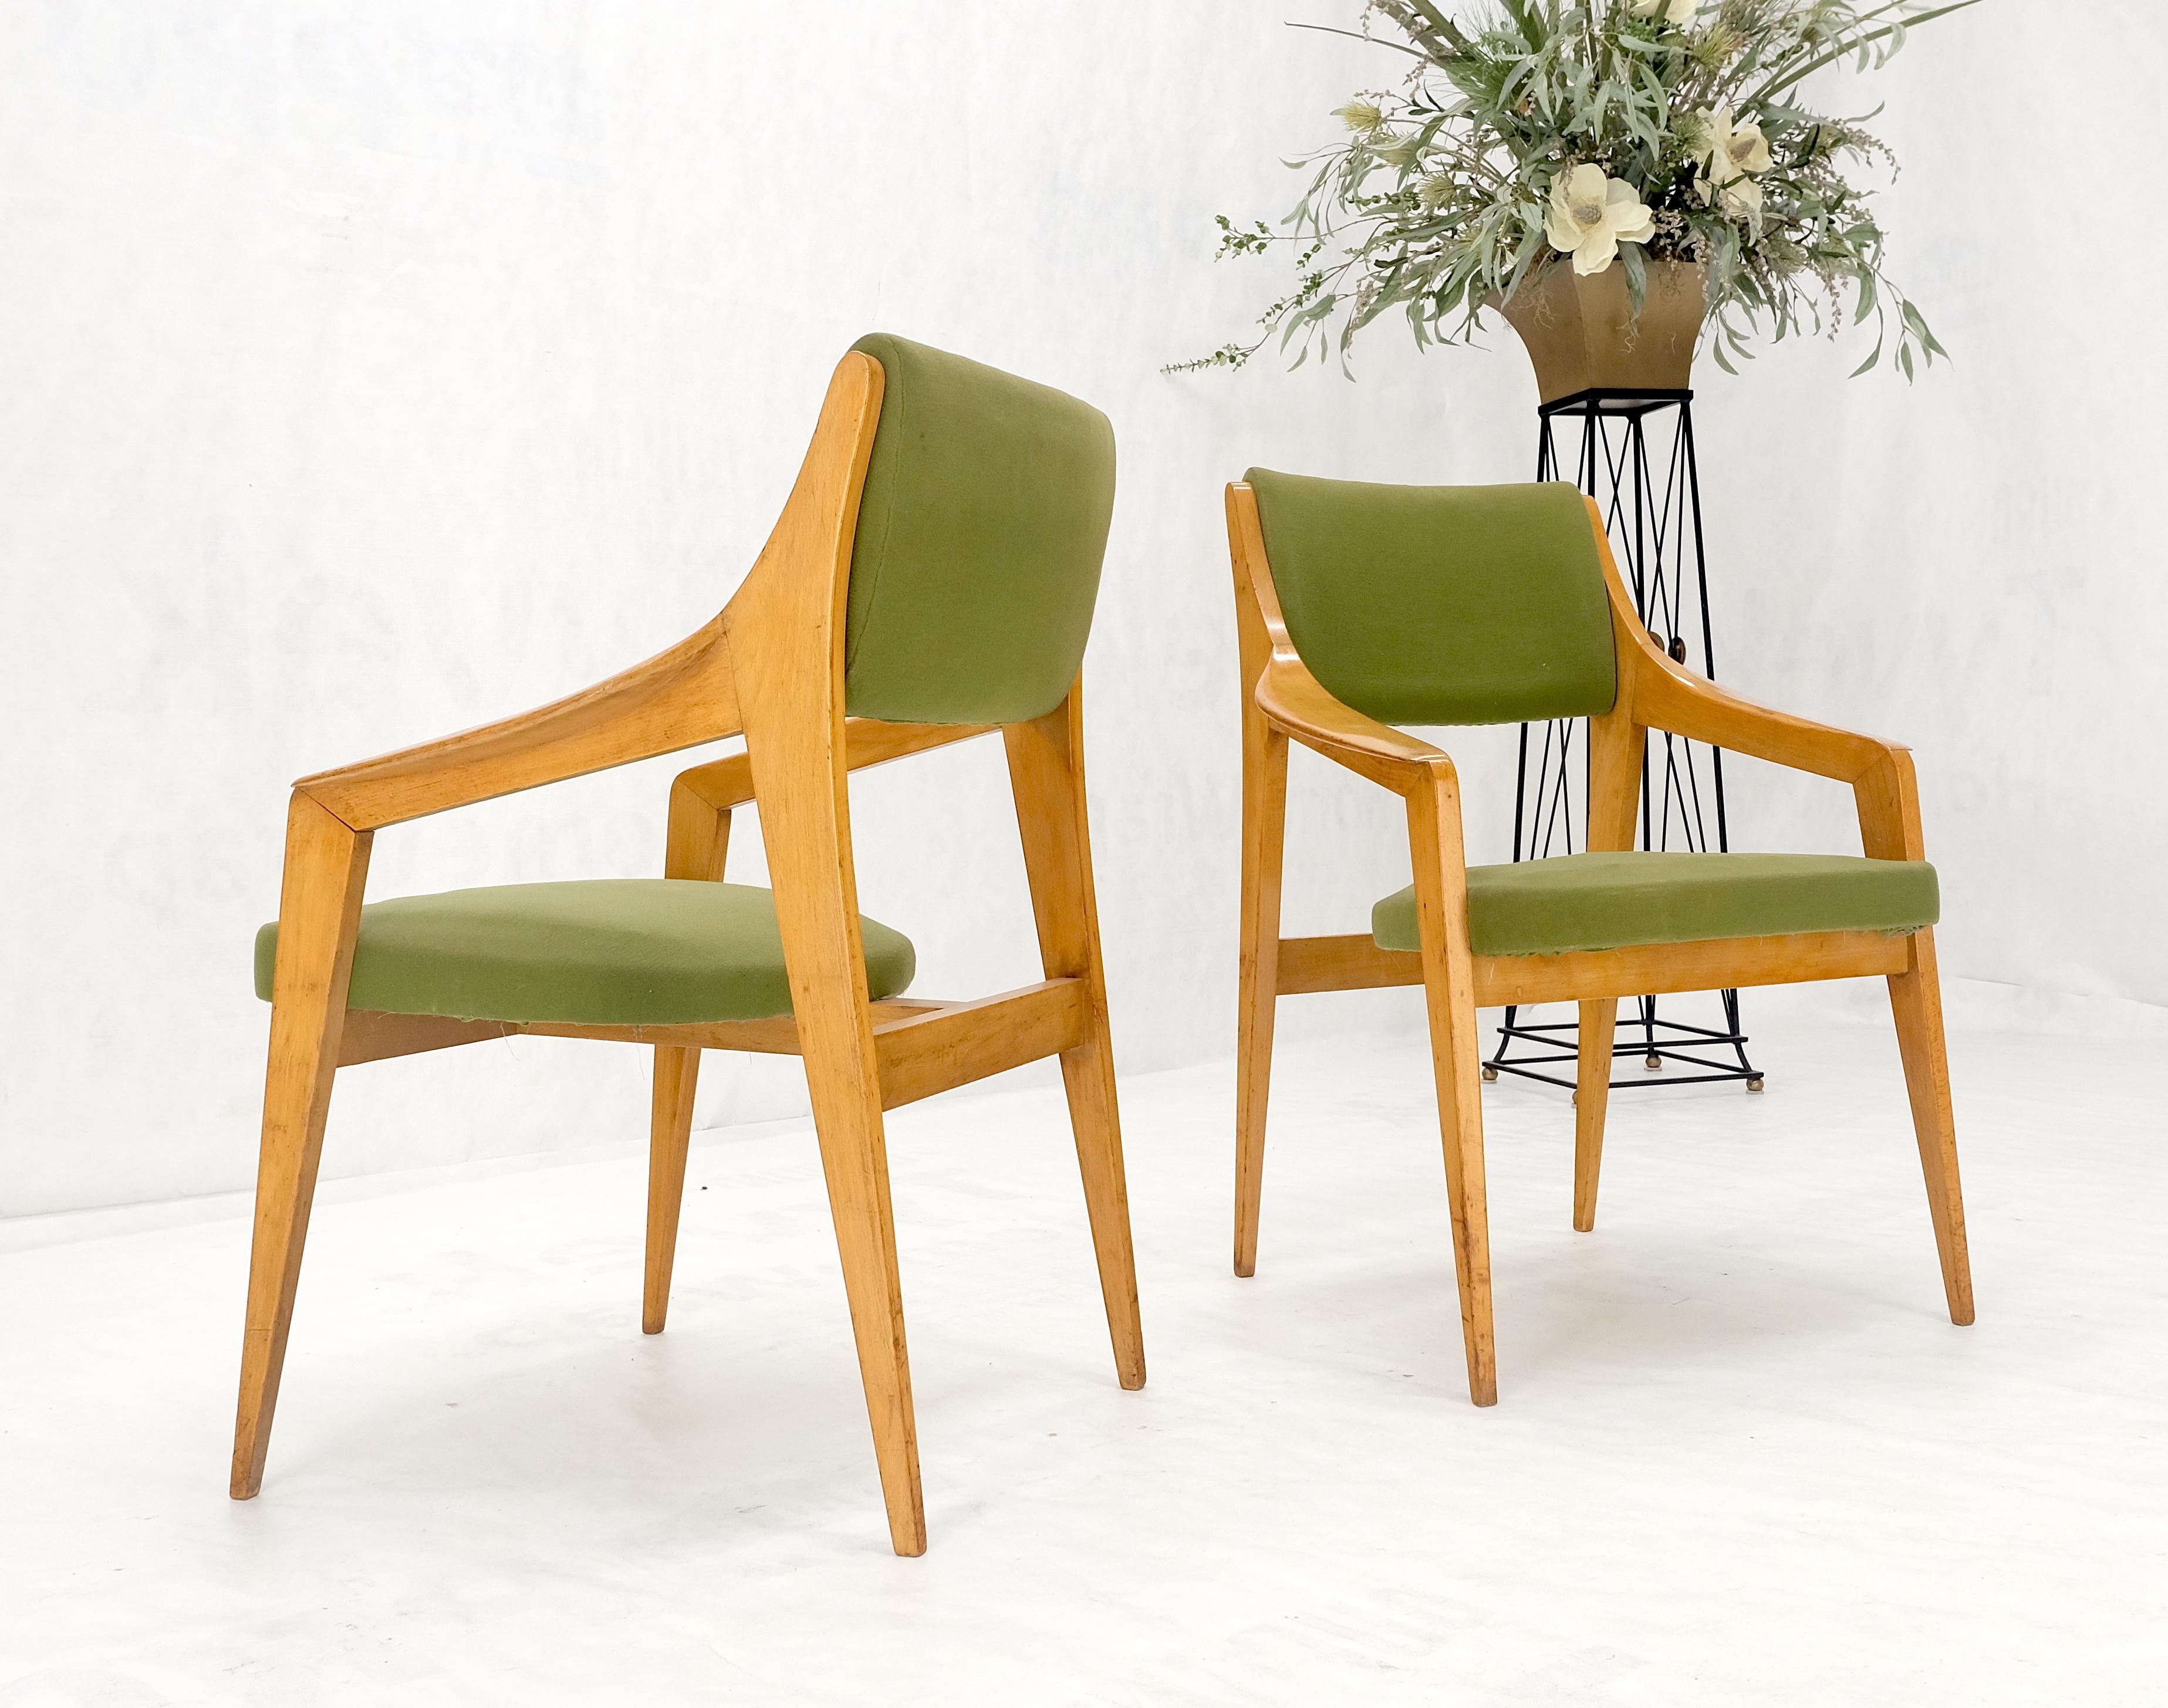 Lacquered Pair of c1950s Blond Birch Scandinavian Swedish Arm Chairs Green Upholstery For Sale